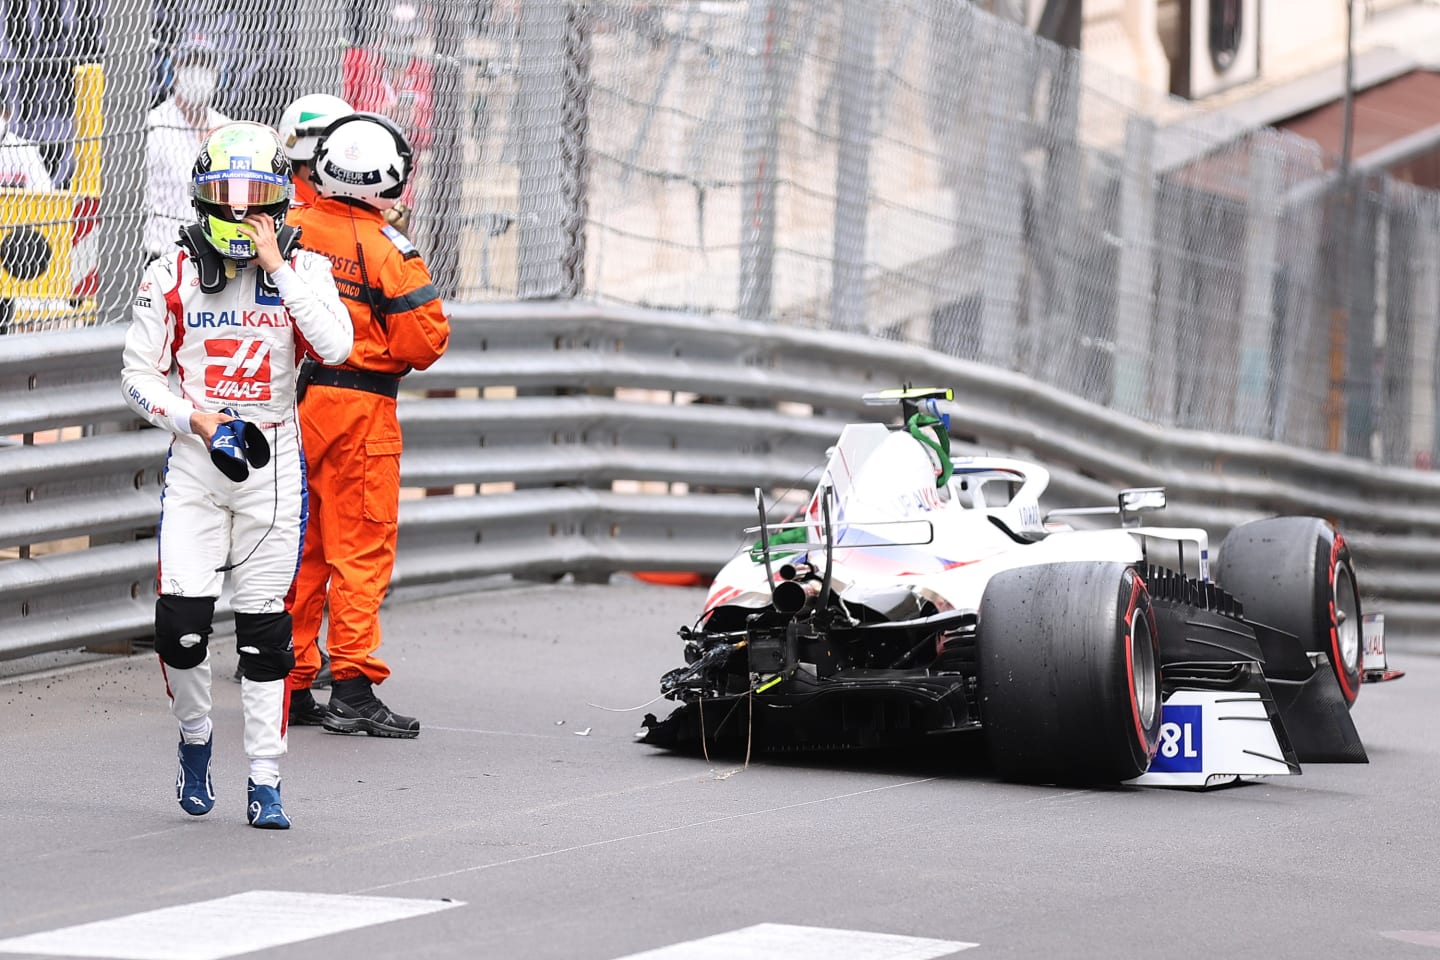 MONTE-CARLO, MONACO - MAY 22: Mick Schumacher of Germany and Haas F1 walks away from his car after crashing during final practice prior to the F1 Grand Prix of Monaco at Circuit de Monaco on May 22, 2021 in Monte-Carlo, Monaco. (Photo by Lars Baron/Getty Images)